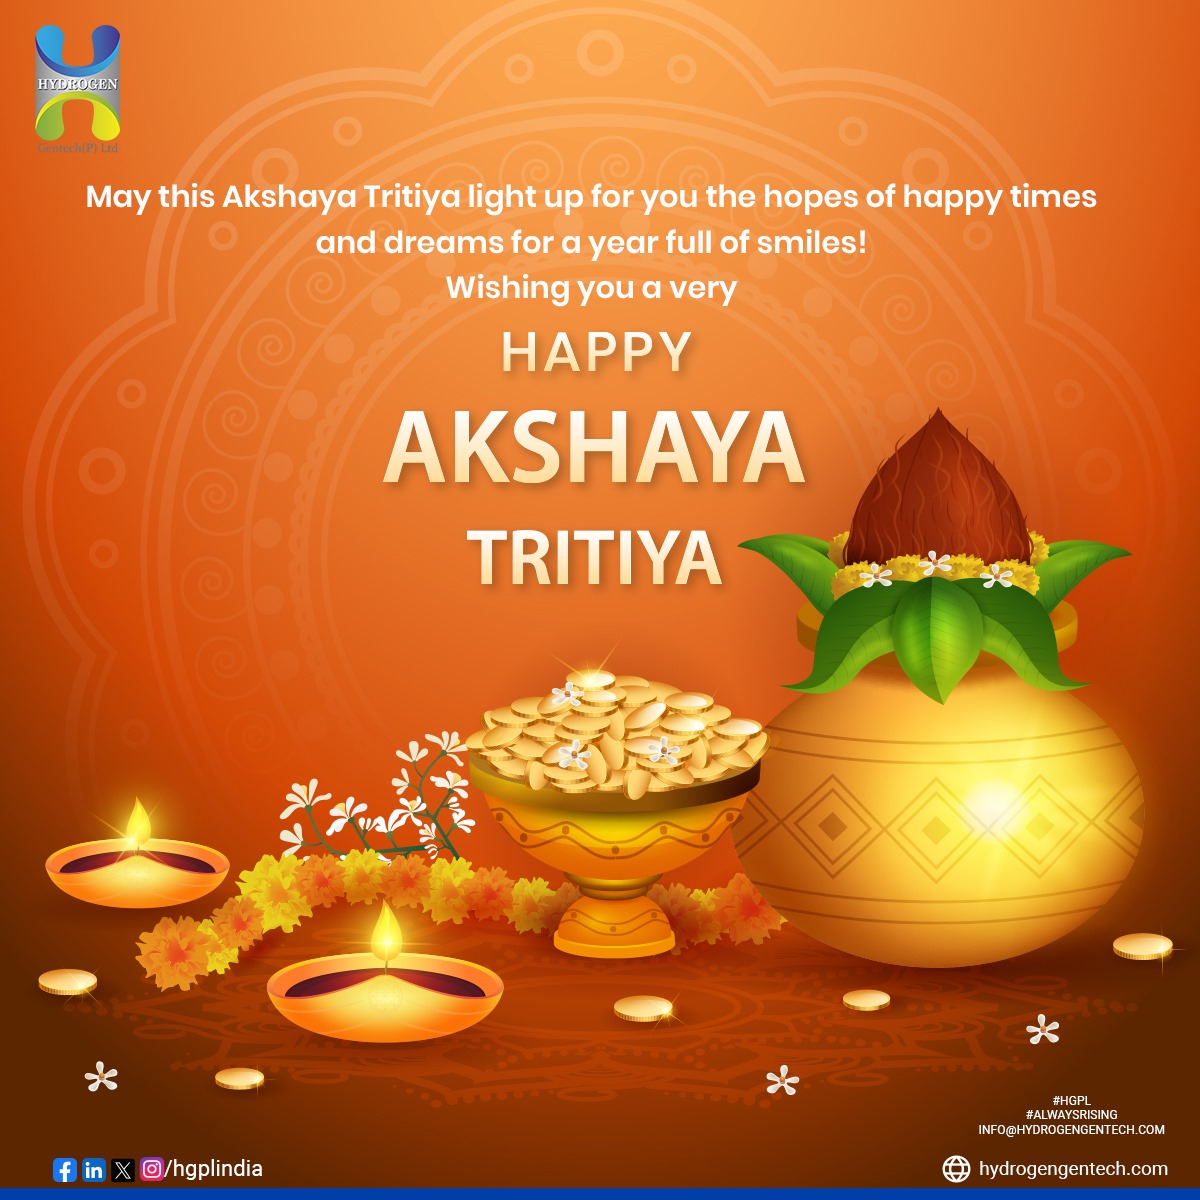 Happy Akshay Tritiya! 🌼 Today, we celebrate abundance and prosperity. At HGPL, we're working towards a future that's abundant in clean energy and sustainable solutions. As we honor this auspicious day, we're reminded of the importance of preserving our planet.